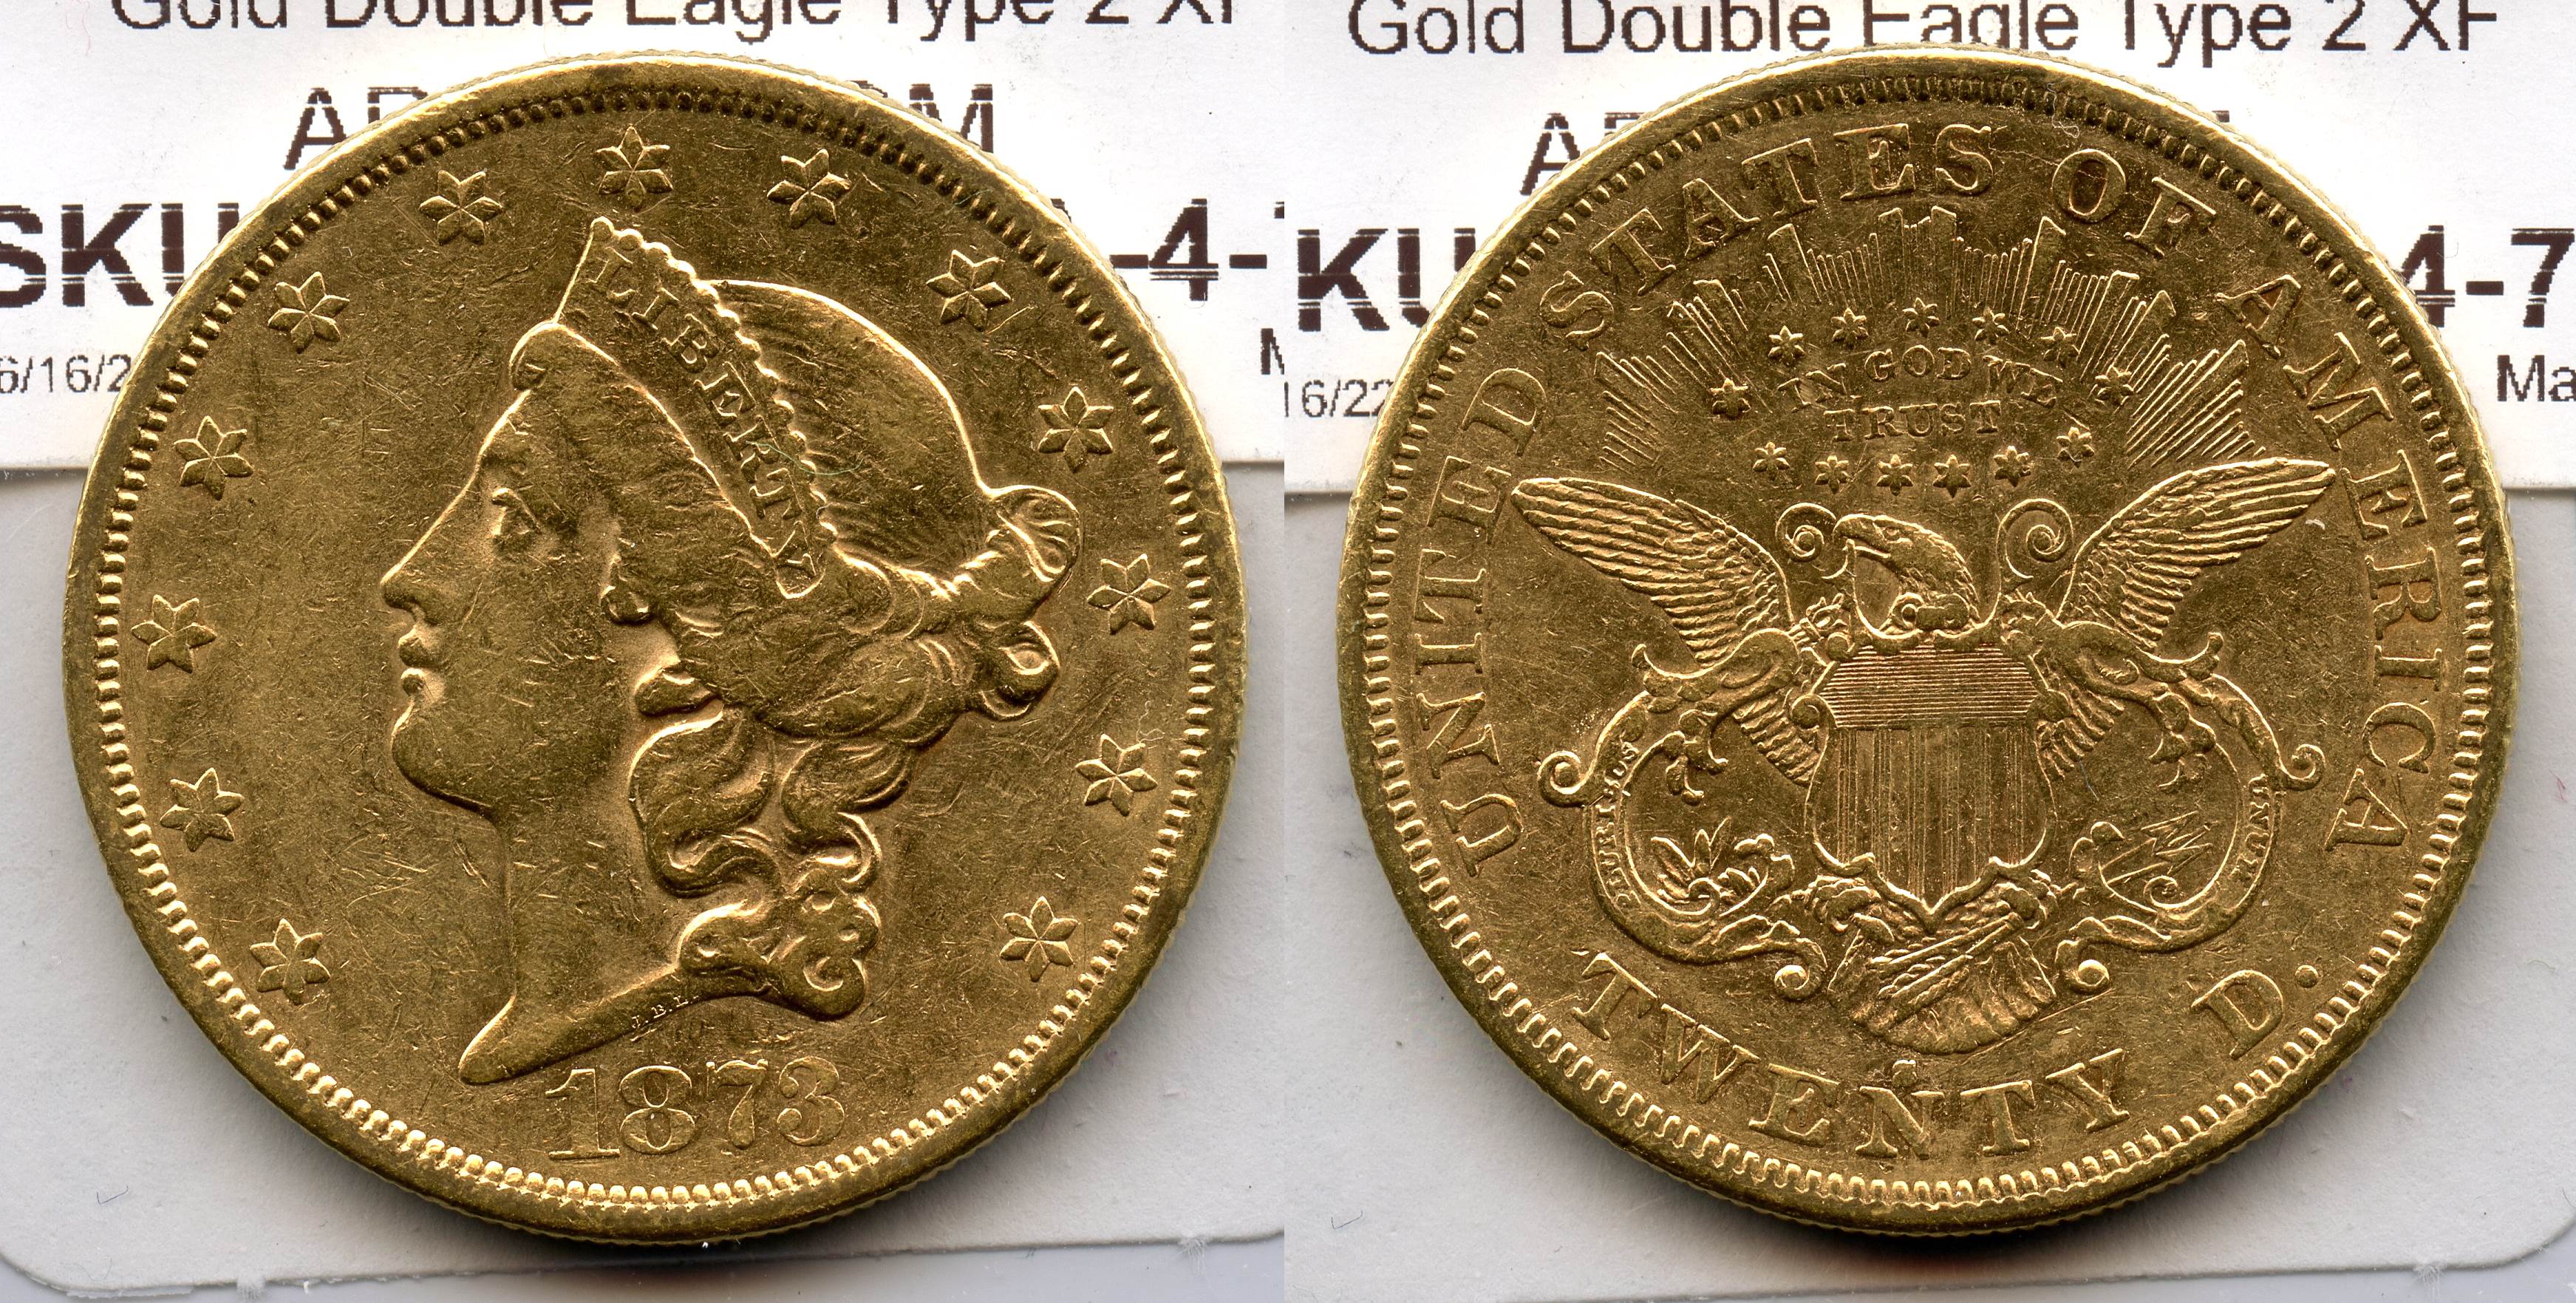 1873-S Closed 3 Liberty Head $20.00 Gold Double Eagle EF-40 #a large